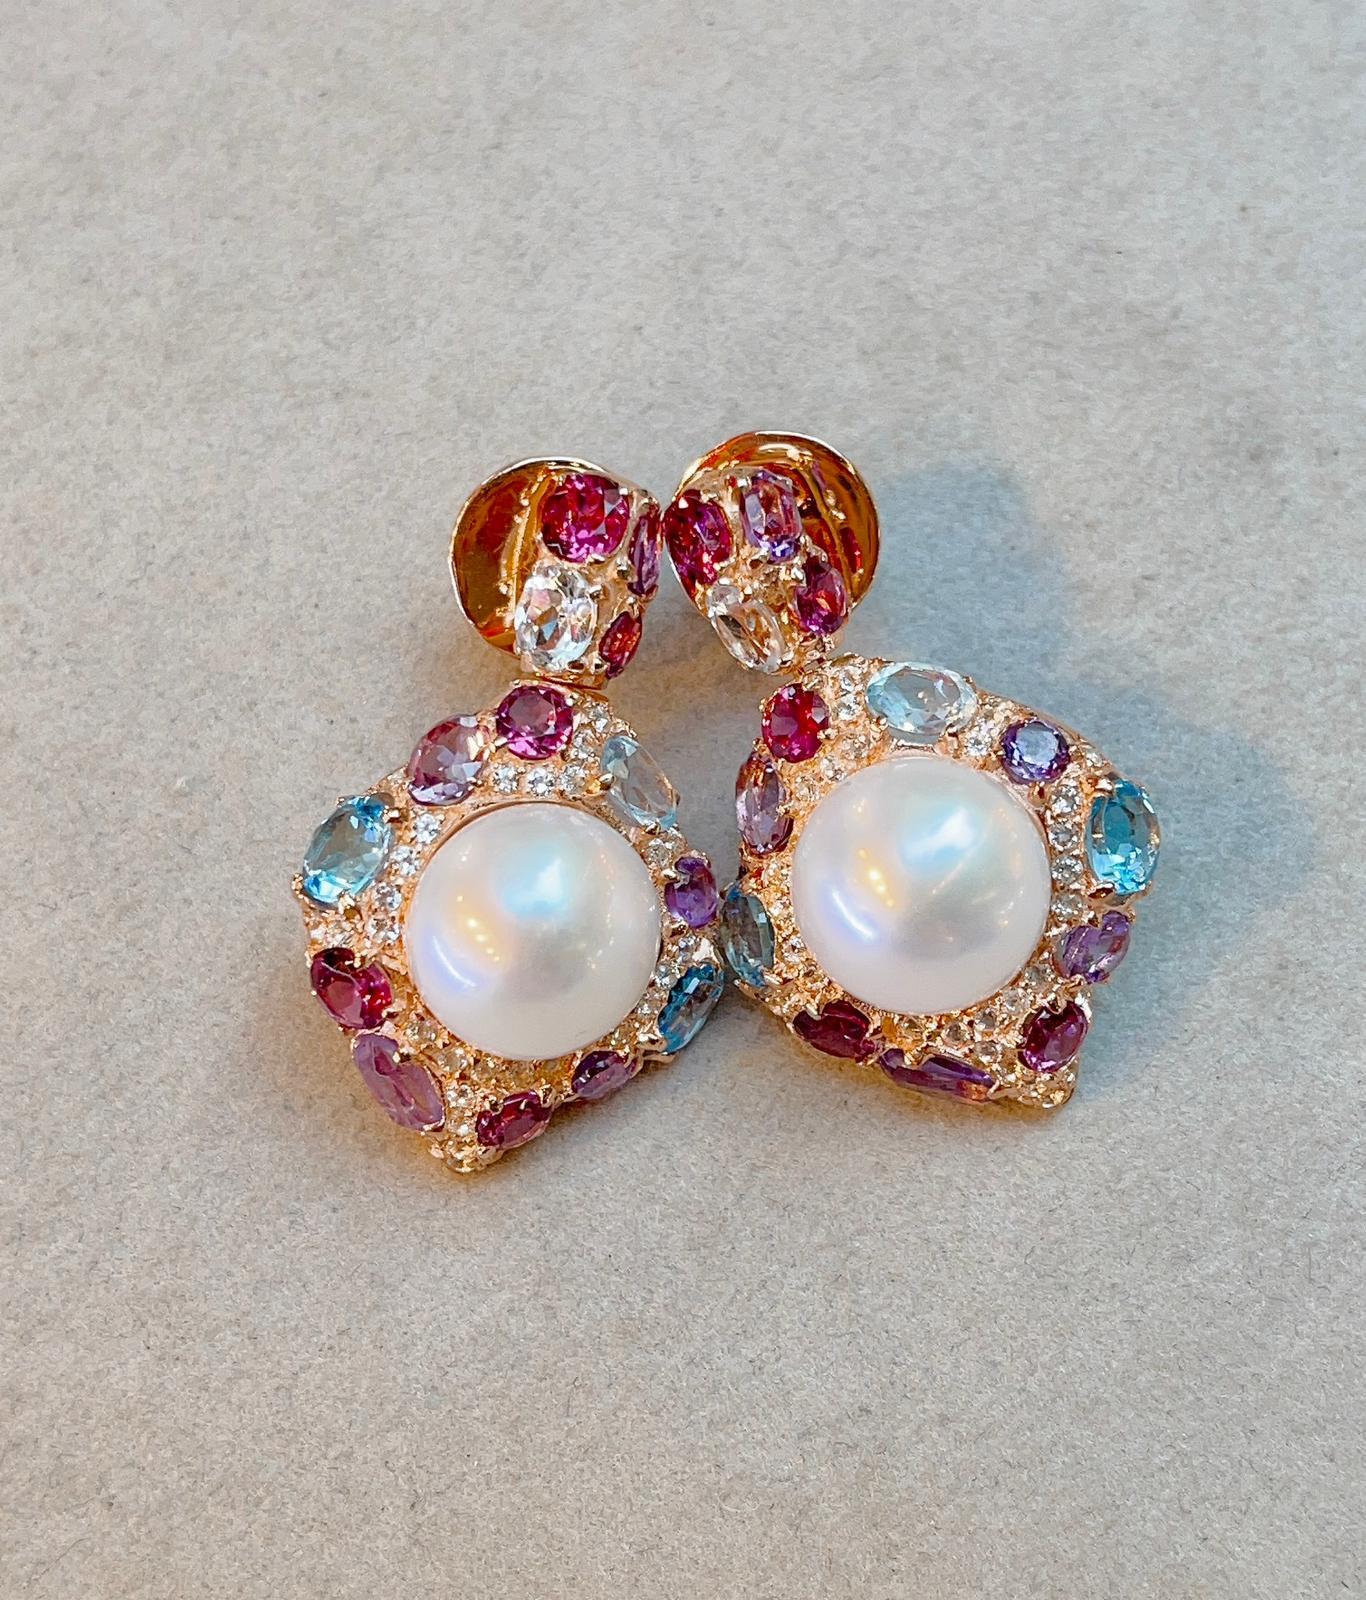 Baroque Bochic “Capri” South Sea Pearl Earrings with Natural Amethyst, Topaz & Rdorite For Sale